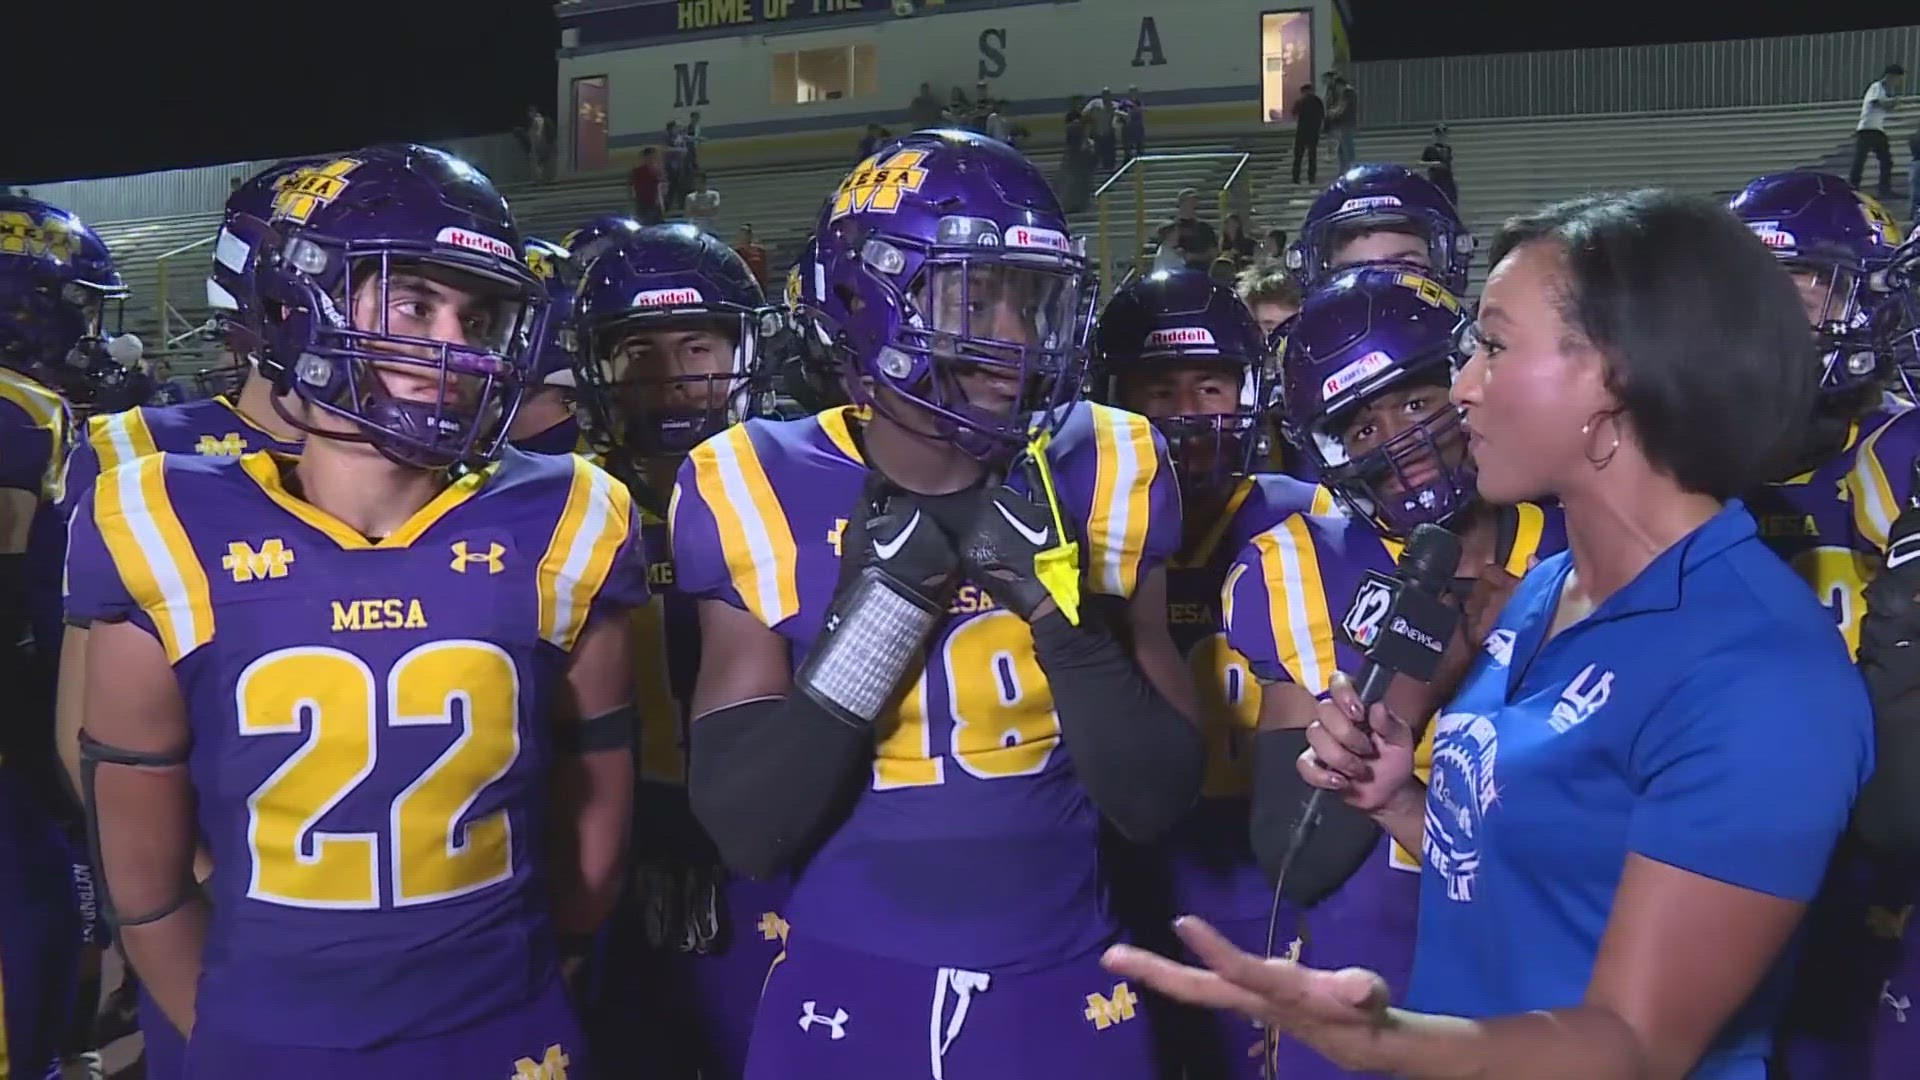 12Sports' Lina Washington is On the Road with Mesa and speaks with the Jackrabbits after their loss to rival Mountain View